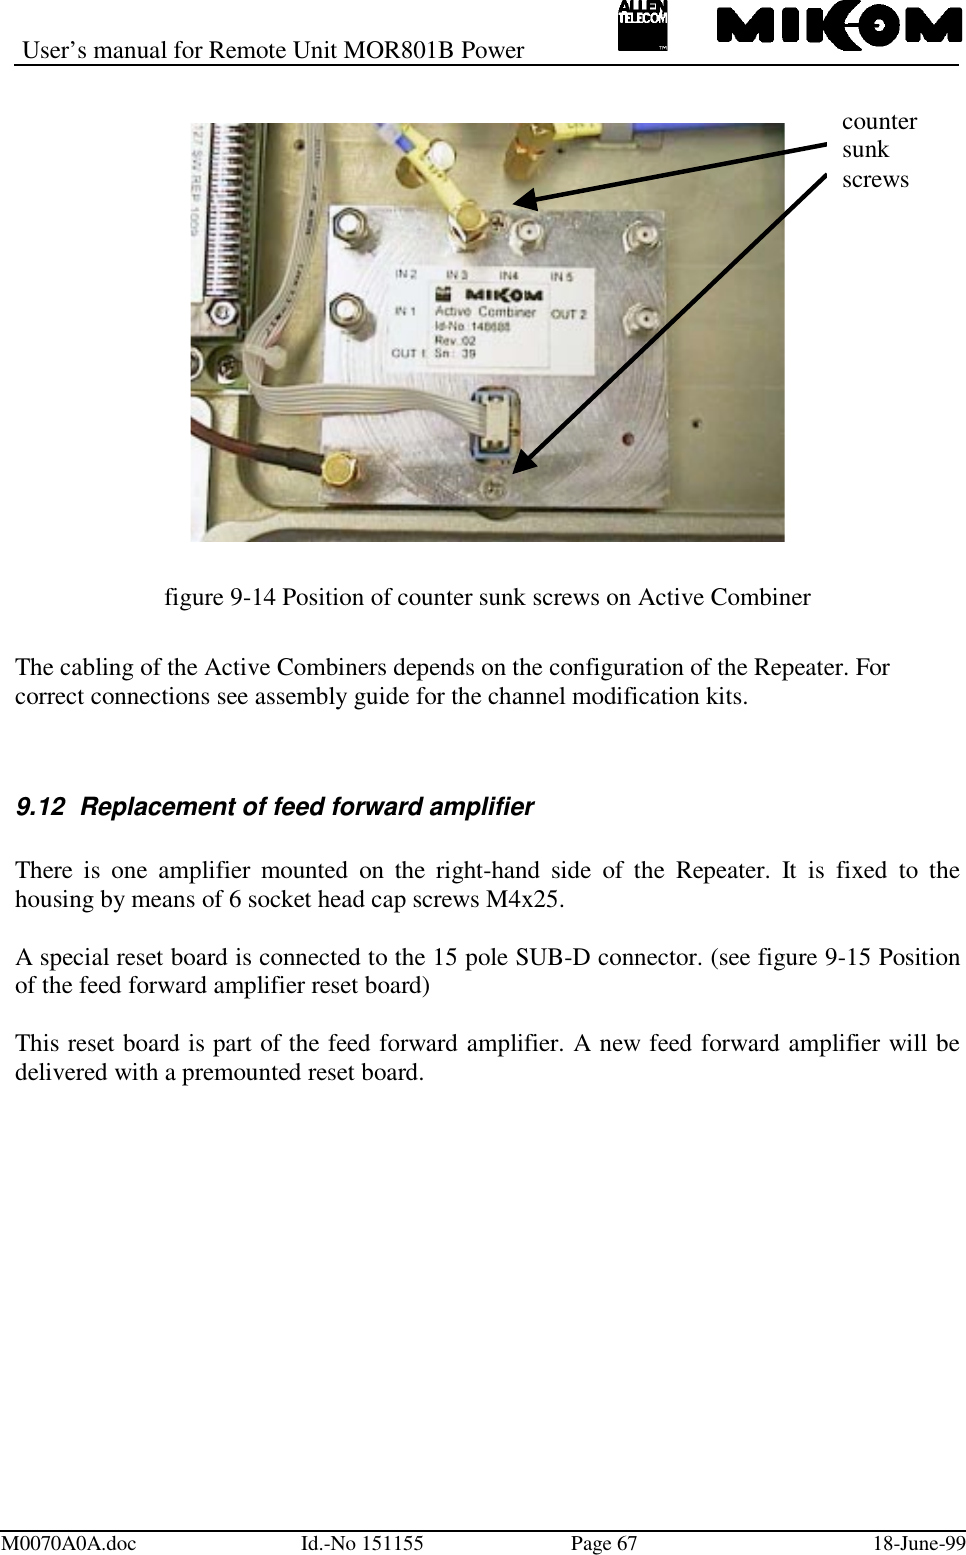 User’s manual for Remote Unit MOR801B PowerM0070A0A.doc Id.-No 151155 Page 67 18-June-99figure 9-14 Position of counter sunk screws on Active CombinerThe cabling of the Active Combiners depends on the configuration of the Repeater. Forcorrect connections see assembly guide for the channel modification kits.9.12  Replacement of feed forward amplifierThere is one amplifier mounted on the right-hand side of the Repeater. It is fixed to thehousing by means of 6 socket head cap screws M4x25.A special reset board is connected to the 15 pole SUB-D connector. (see figure 9-15 Positionof the feed forward amplifier reset board)This reset board is part of the feed forward amplifier. A new feed forward amplifier will bedelivered with a premounted reset board.countersunkscrews